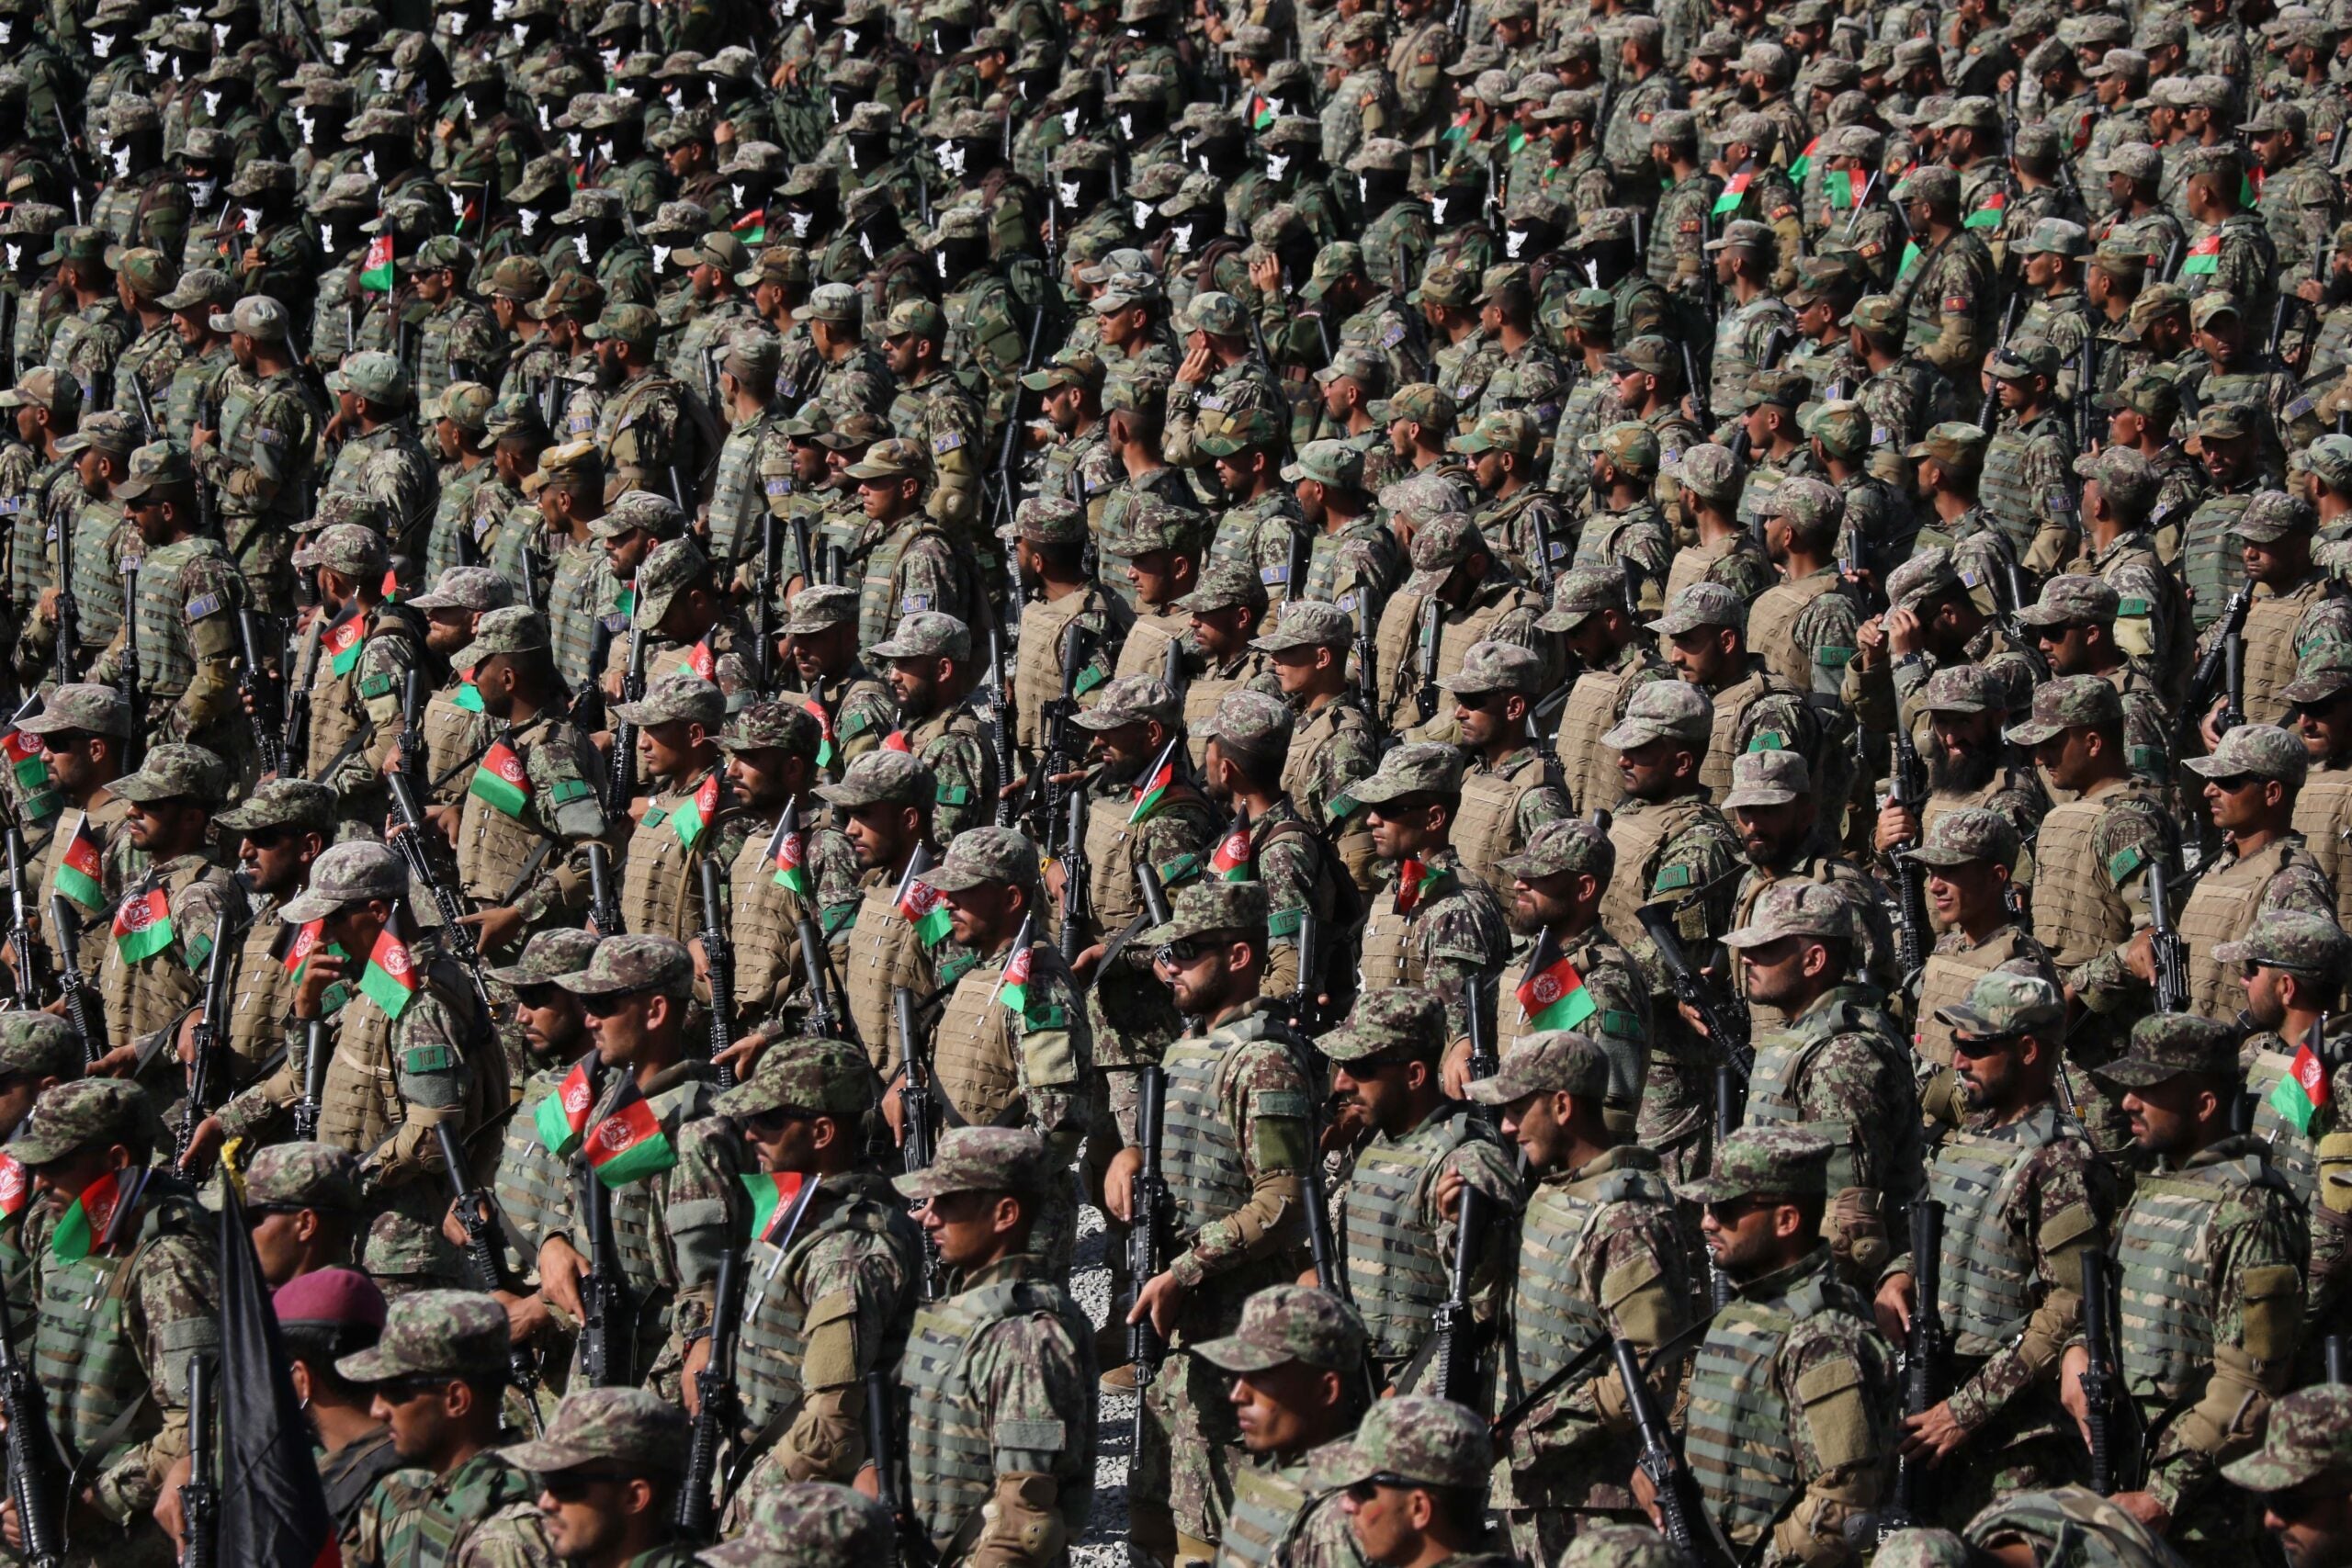 KABUL, AFGHANISTAN-MAY 31: Afghan special force commando unit officers and soldiers attend a graduation ceremony at the military academy in Kabul, Afghanistan, on May 31, 2021. At least hundreds Afghan special force commando officers and soldiers including women were graduated. According to the reports, the Taliban have significantly increased violence immediately across the Afghanistan after the US, and NATO forces began the last phase of their pull out of the country on 01 May. (Photo by Haroon Sabawoon/Anadolu Agency via Getty Images)